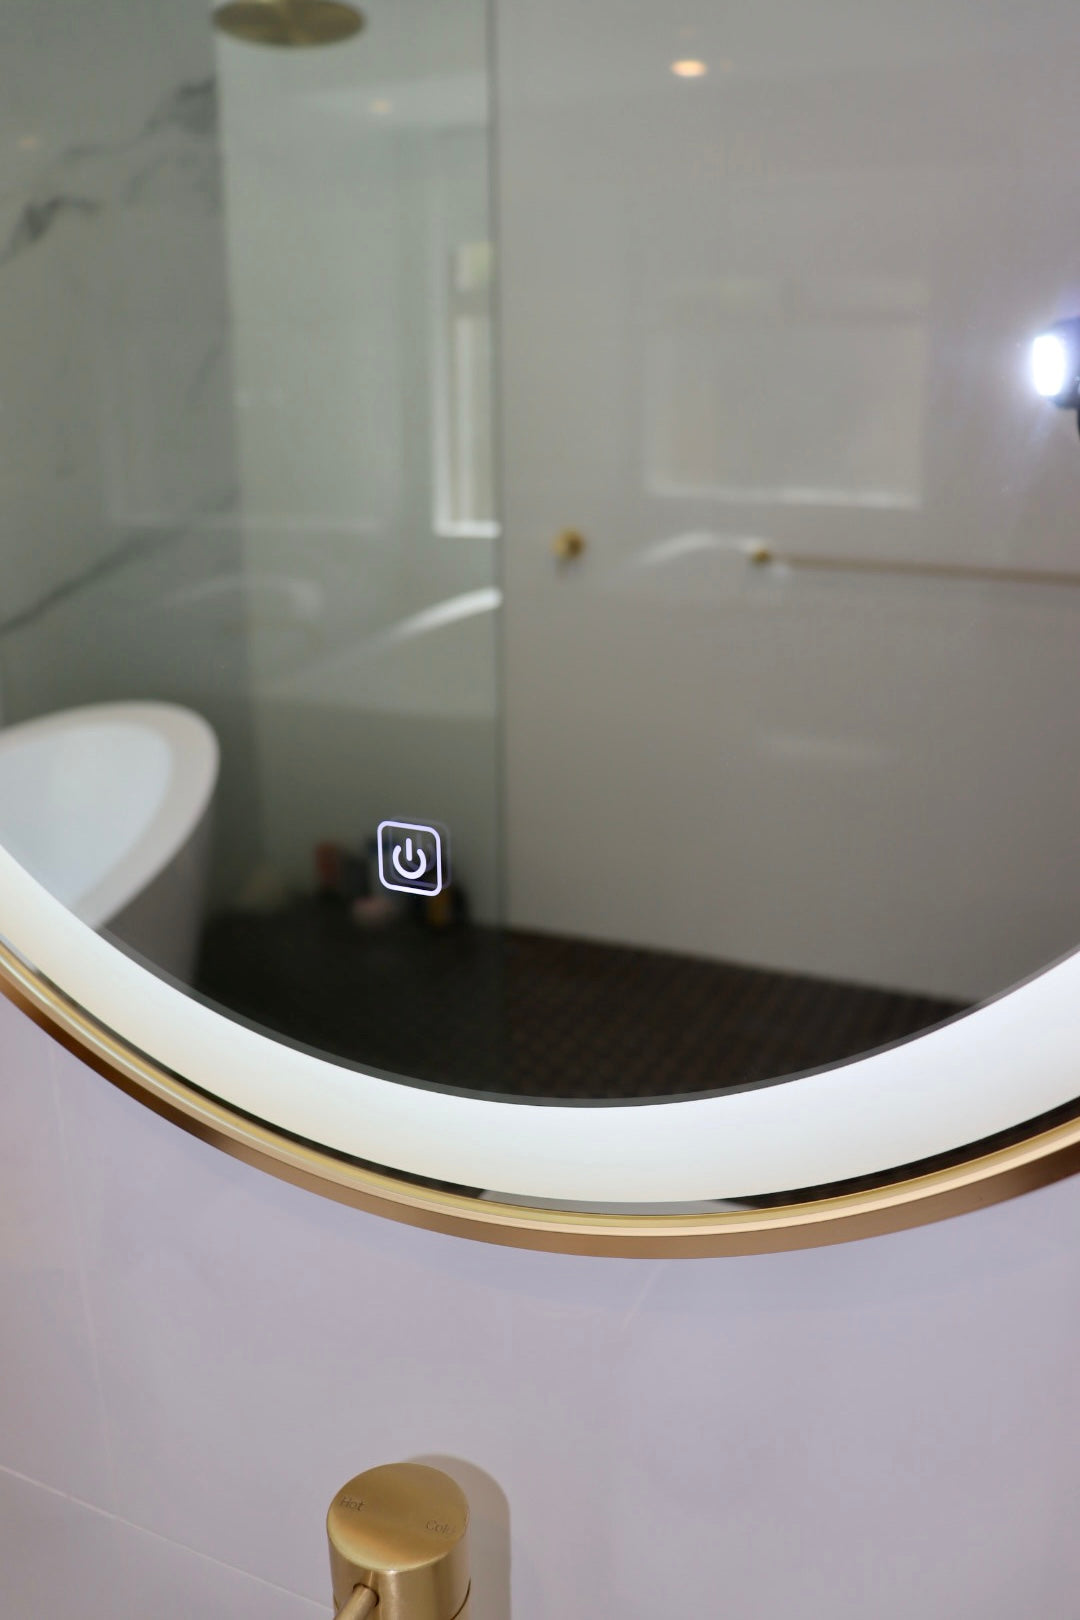 LED Vanity Mirror's Touch Button Close-up